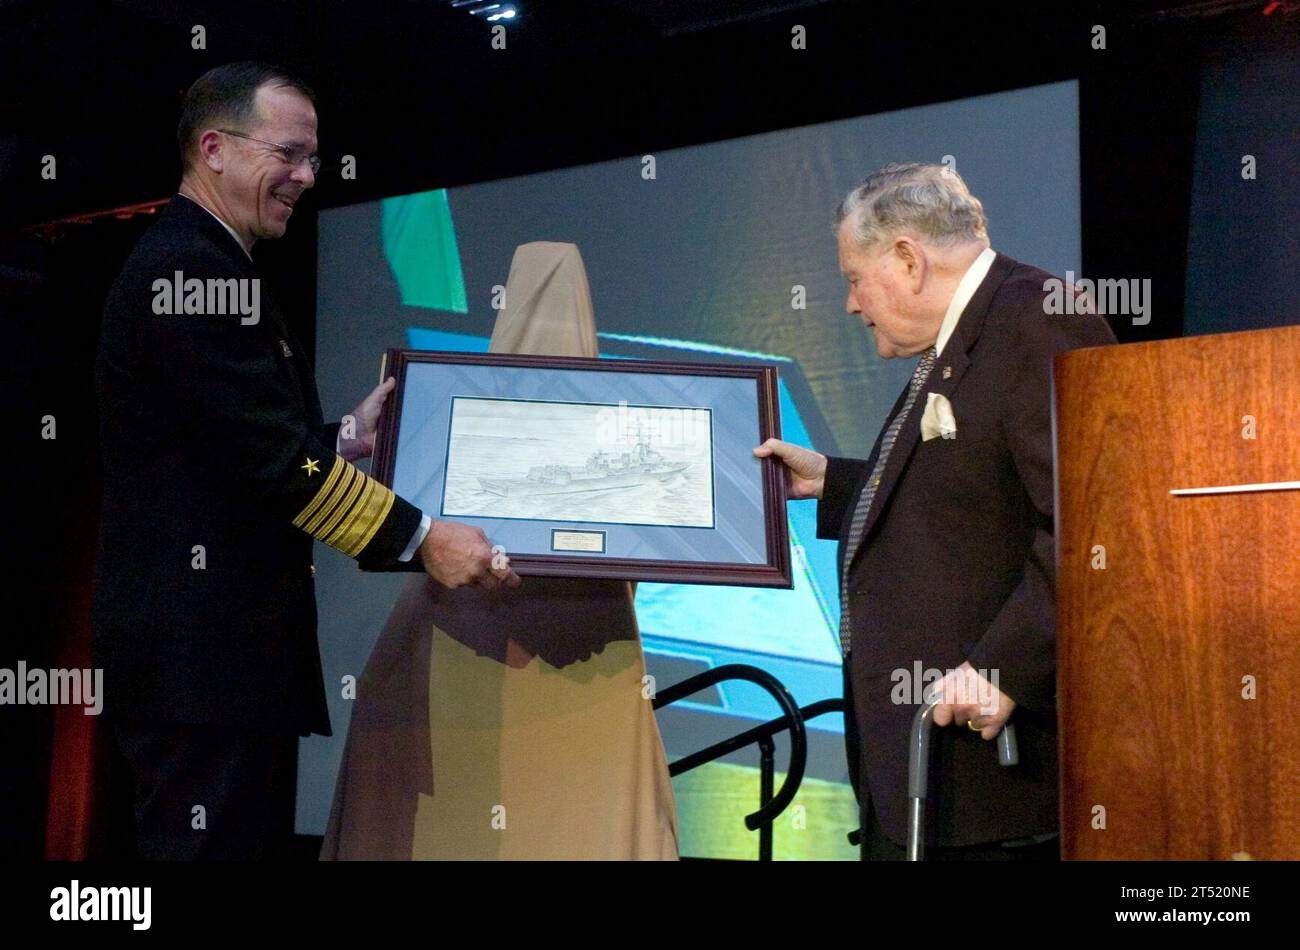 0611270696M-241 Moorestown, N.J. (Nov. 27, 2006) - Chief of Naval Operations (CNO) Adm. Mike Mullen presents retired Rear Adm. Wayne E. Meyer with a picture of the ship that will bear his name at a ceremony celebrating the deliverance of the 100th Aegis Weapons System to the Navy. The ship was named after Meyer, who is widely regarded as the 'The Father of Aegis' after spearheading the development of the defense system, and will fittingly receive the 100th system. U.S. Navy Stock Photo